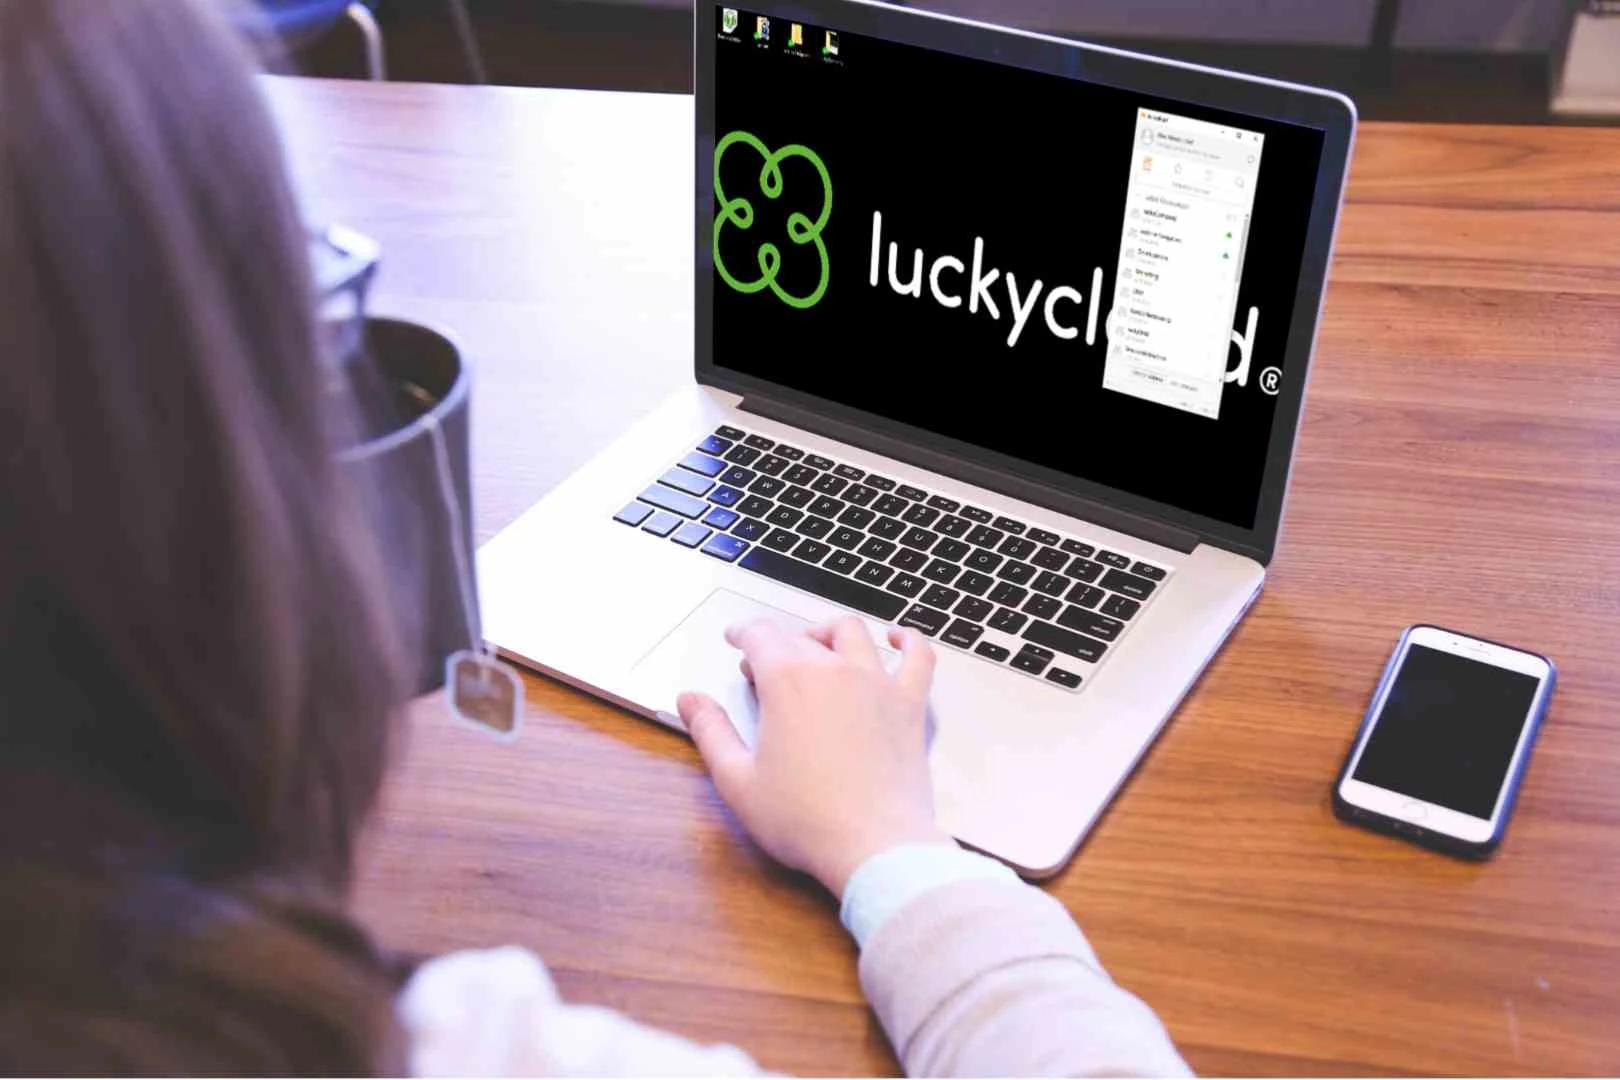 Bird's eye view over the shoulders of a woman. The luckycloud logo can be seen on the screen of a laptop.